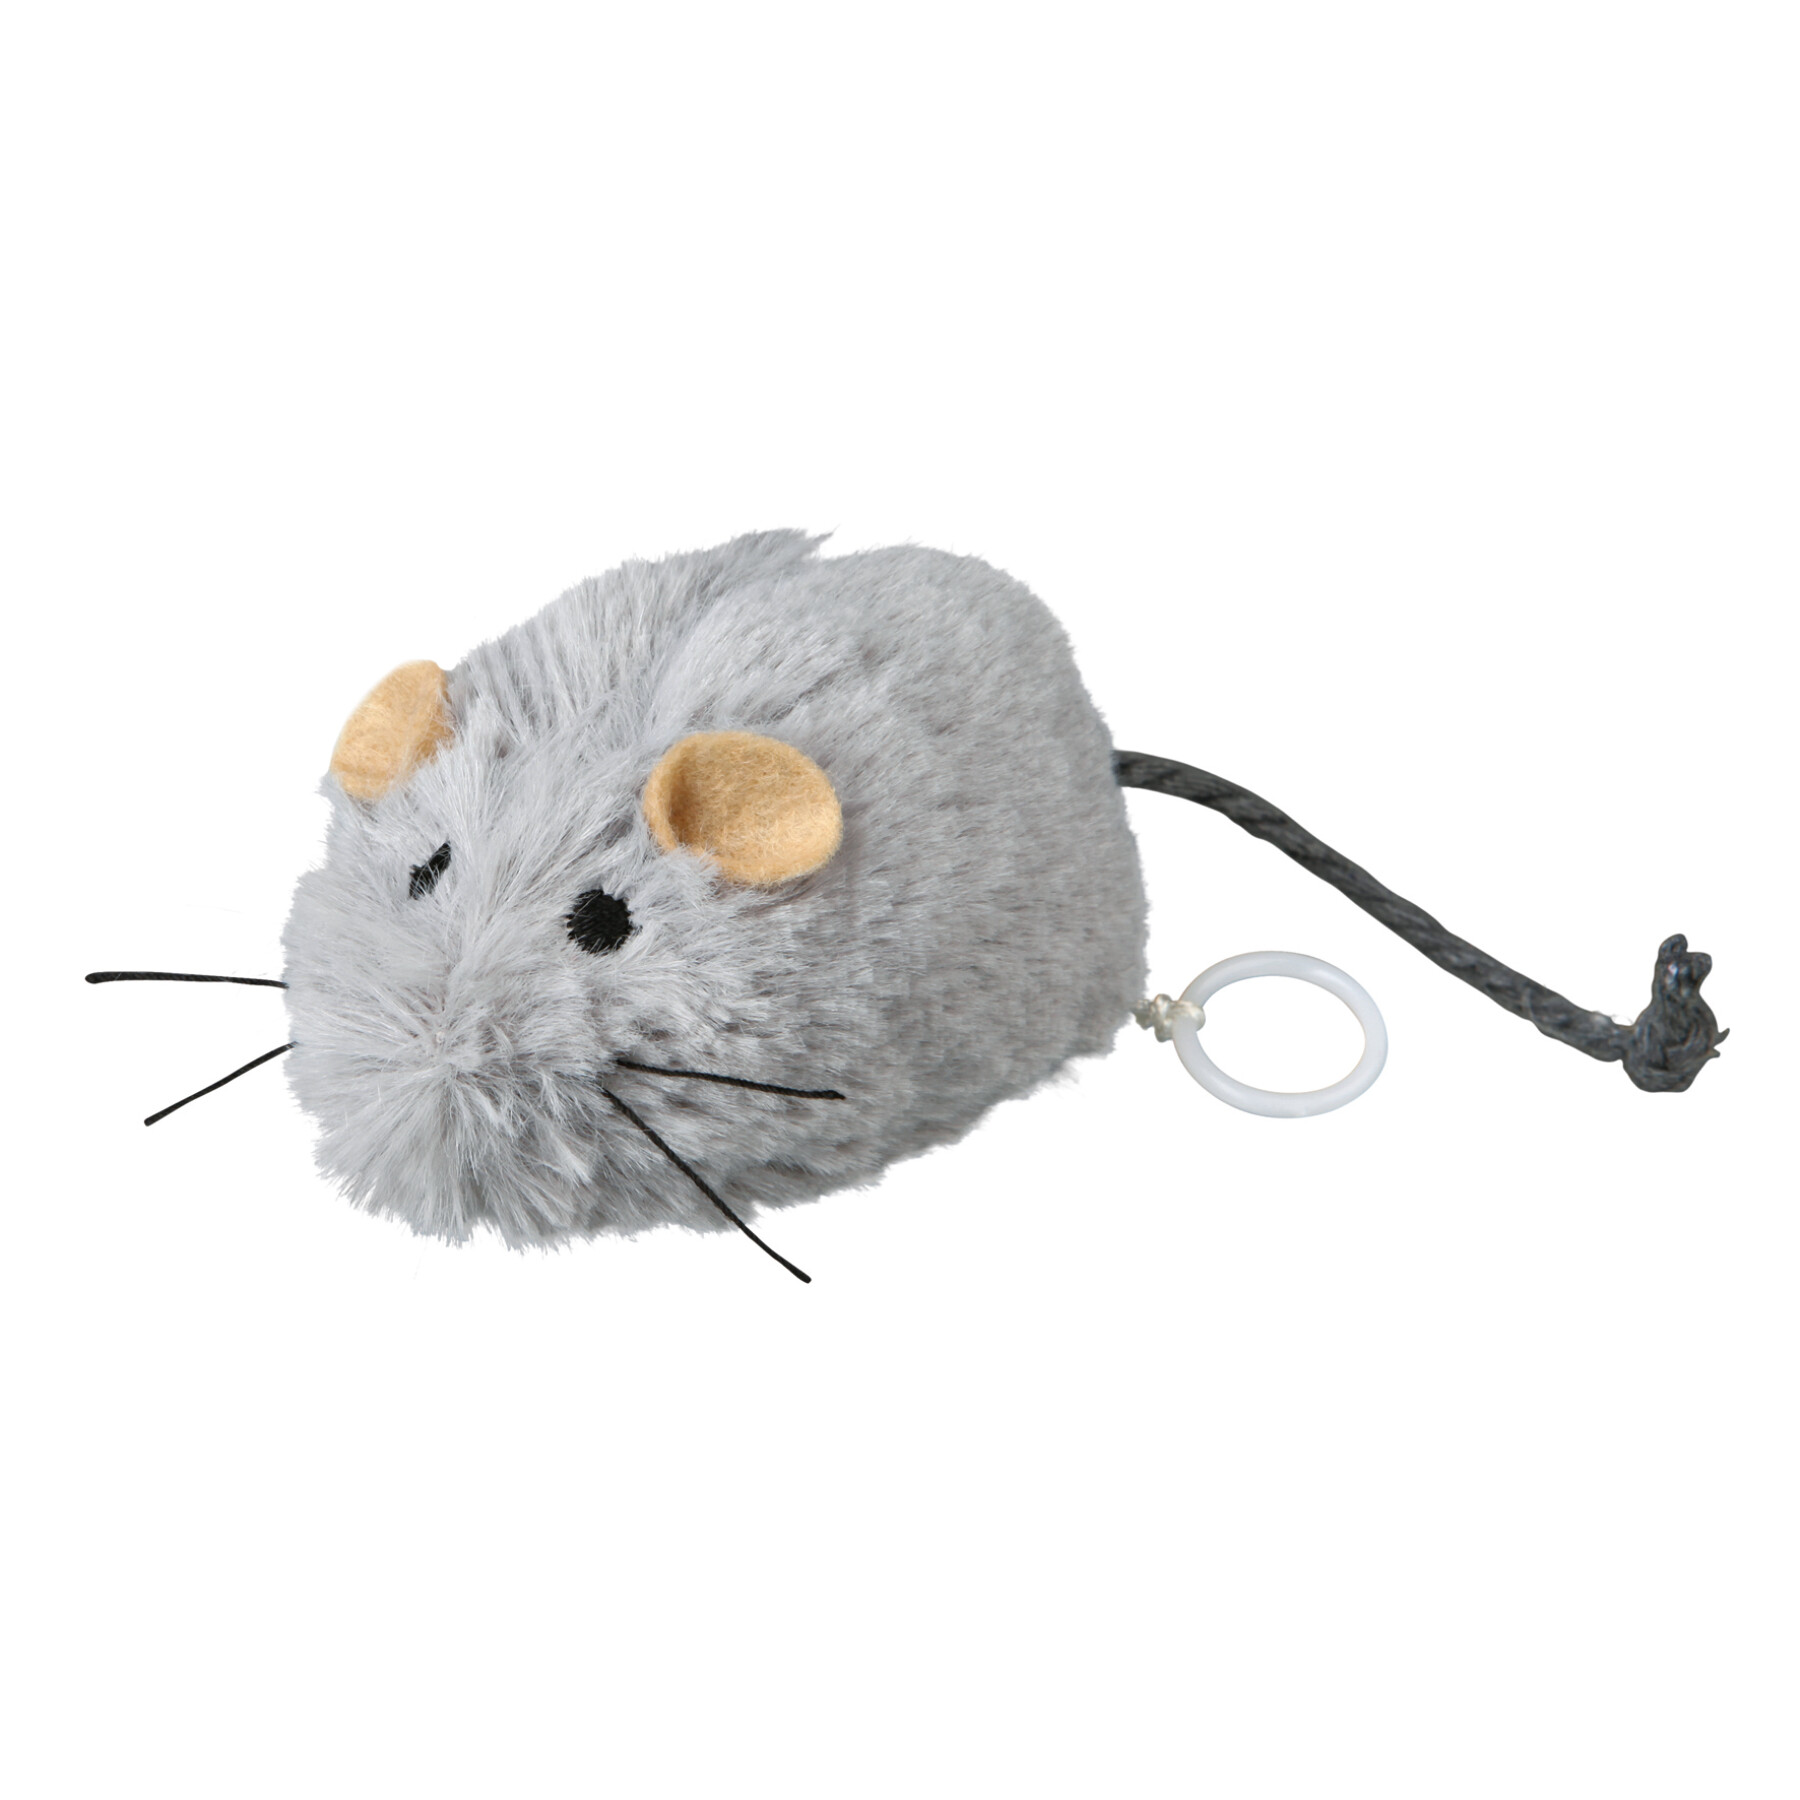 Wiggly mouse plush toy for cats Trixie (x3)